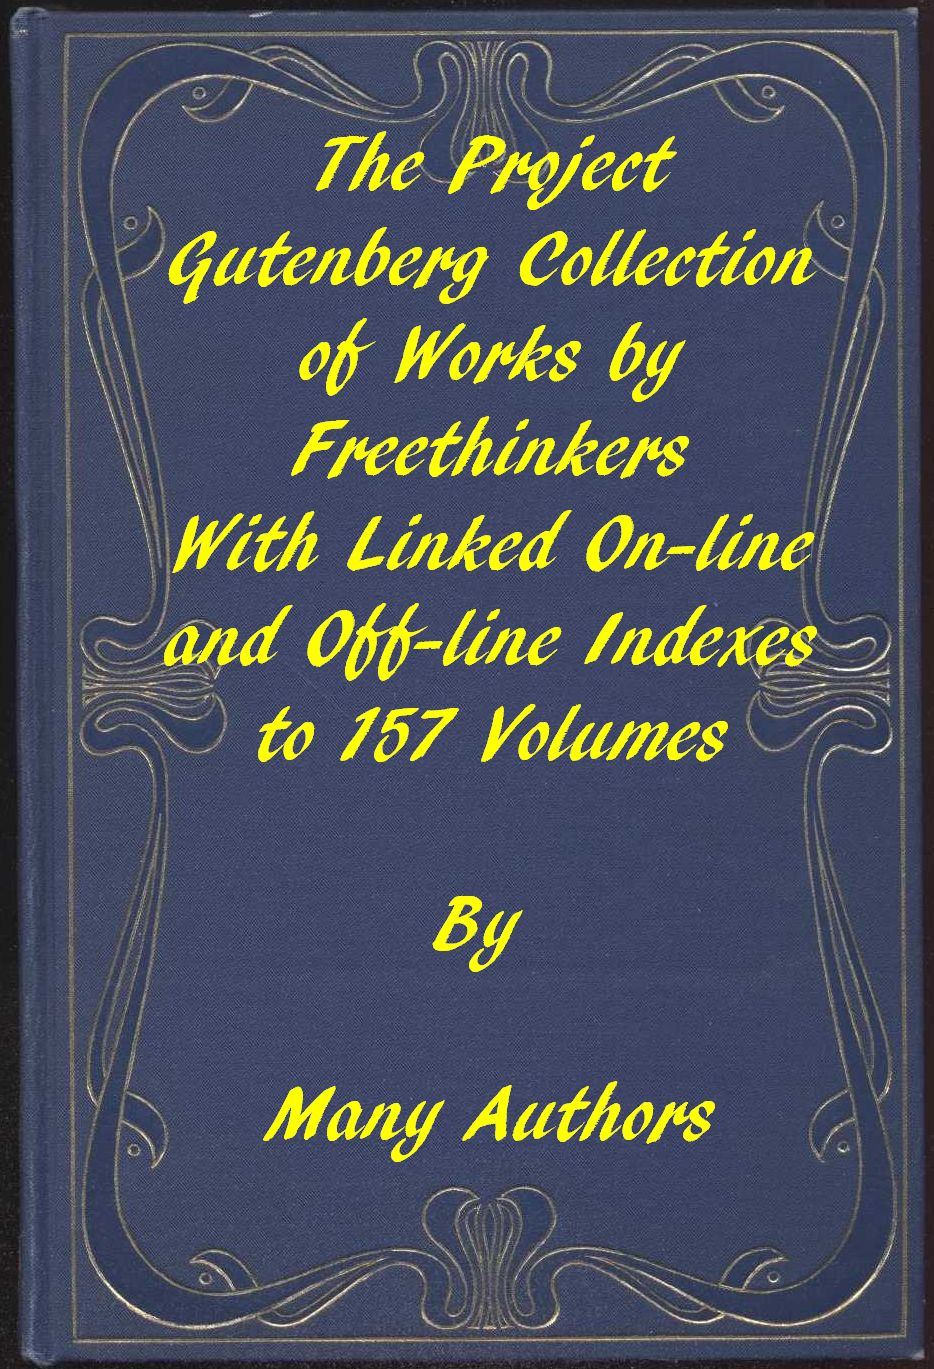 The Project Gutenberg Collection of Works by Freethinkers&#10;With Linked On-line and Off-line Indexes to 157 Volumes by 90 Authors; Plus Indexes to 15 other Author's Multi-Volume Sets.